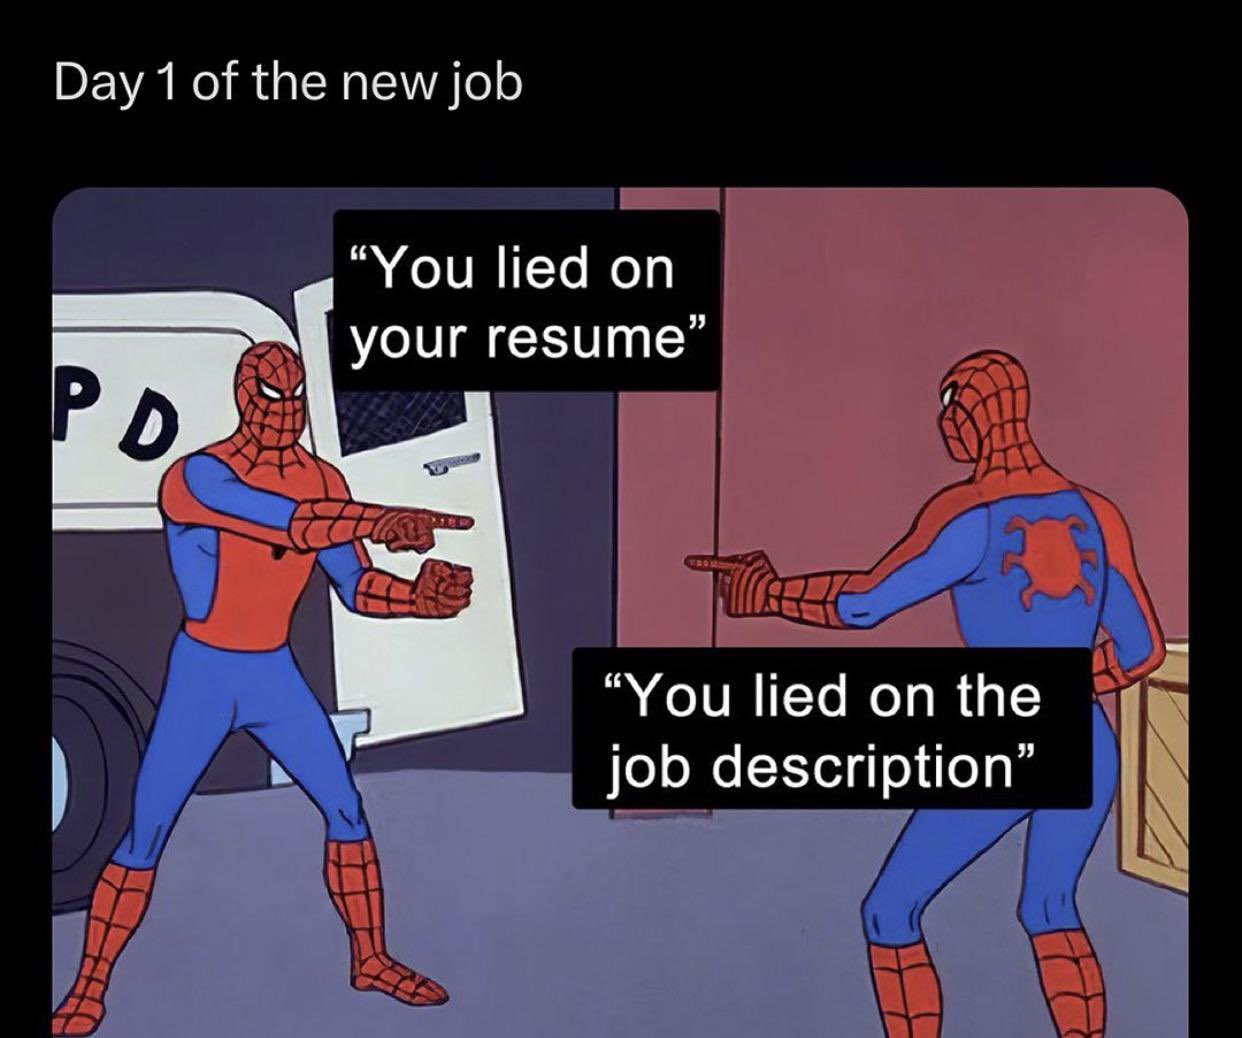 funny memes - spiderman meme - Day 1 of the new job Pd "You lied on your resume" "You lied on the job description"